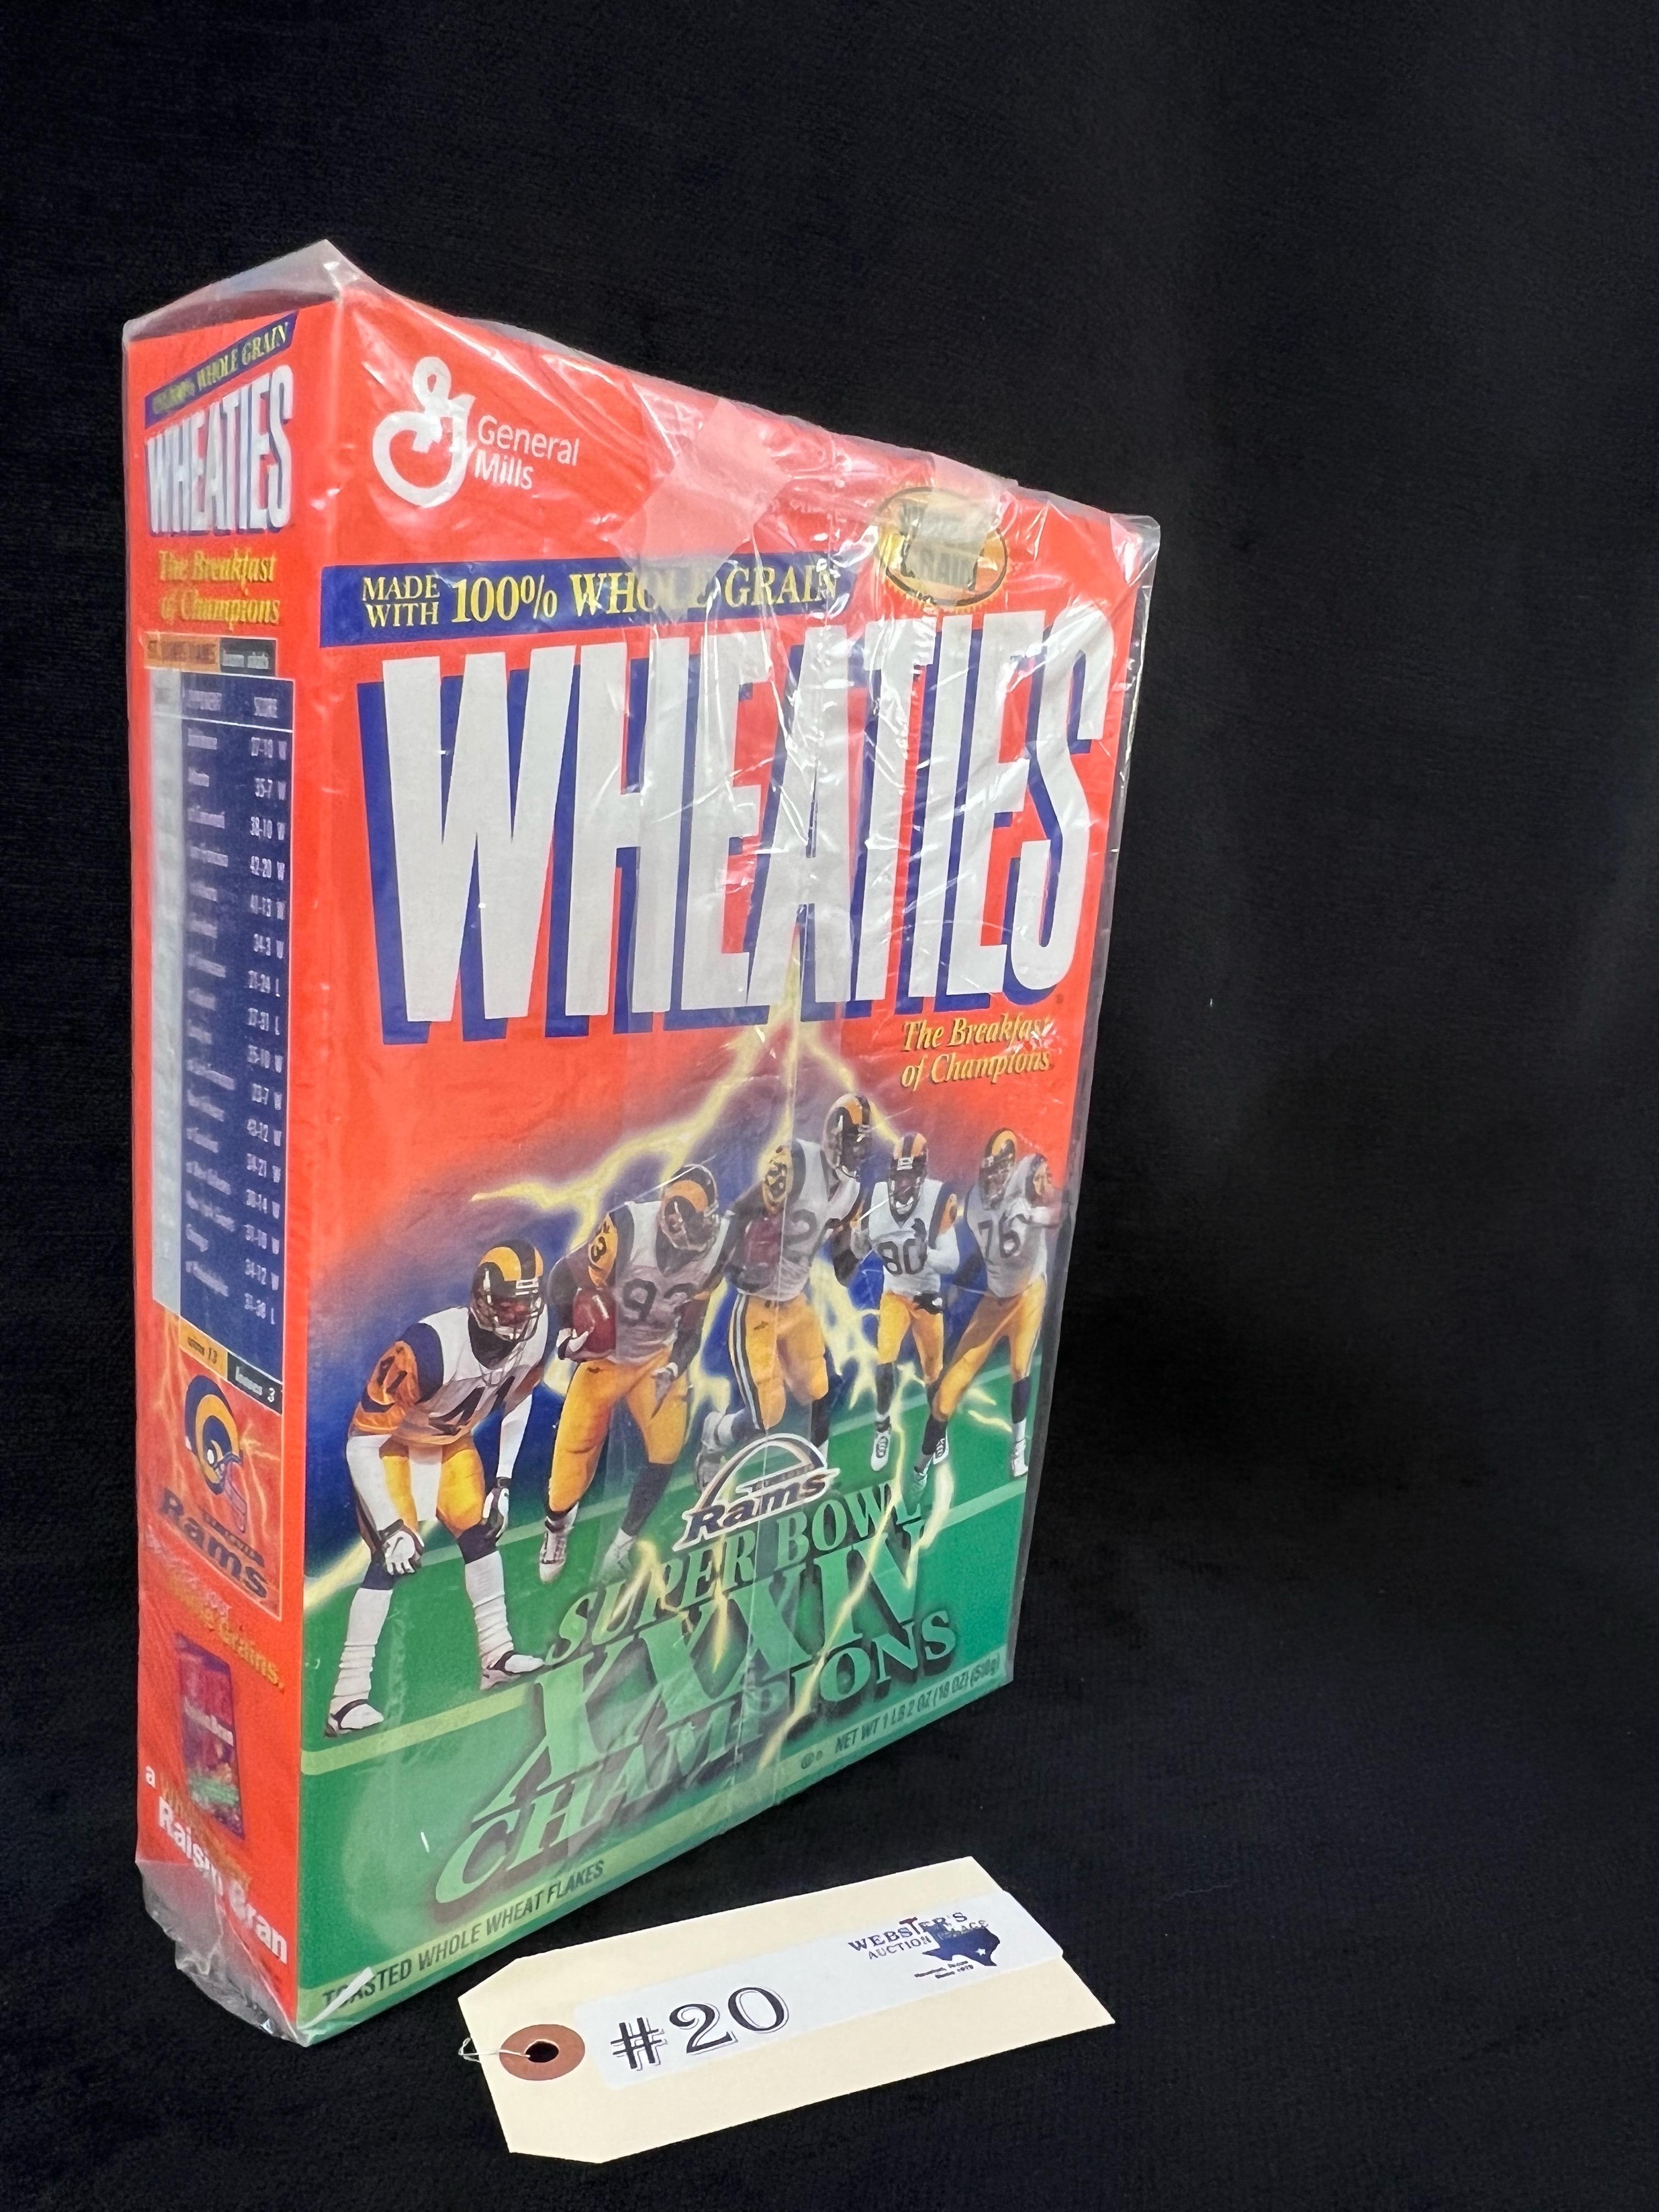 LARGE LOT OF COLLECTOR WHEATIES, WARNER'S CRUNCH TIME AND MARK MCGWIRE CEREAL